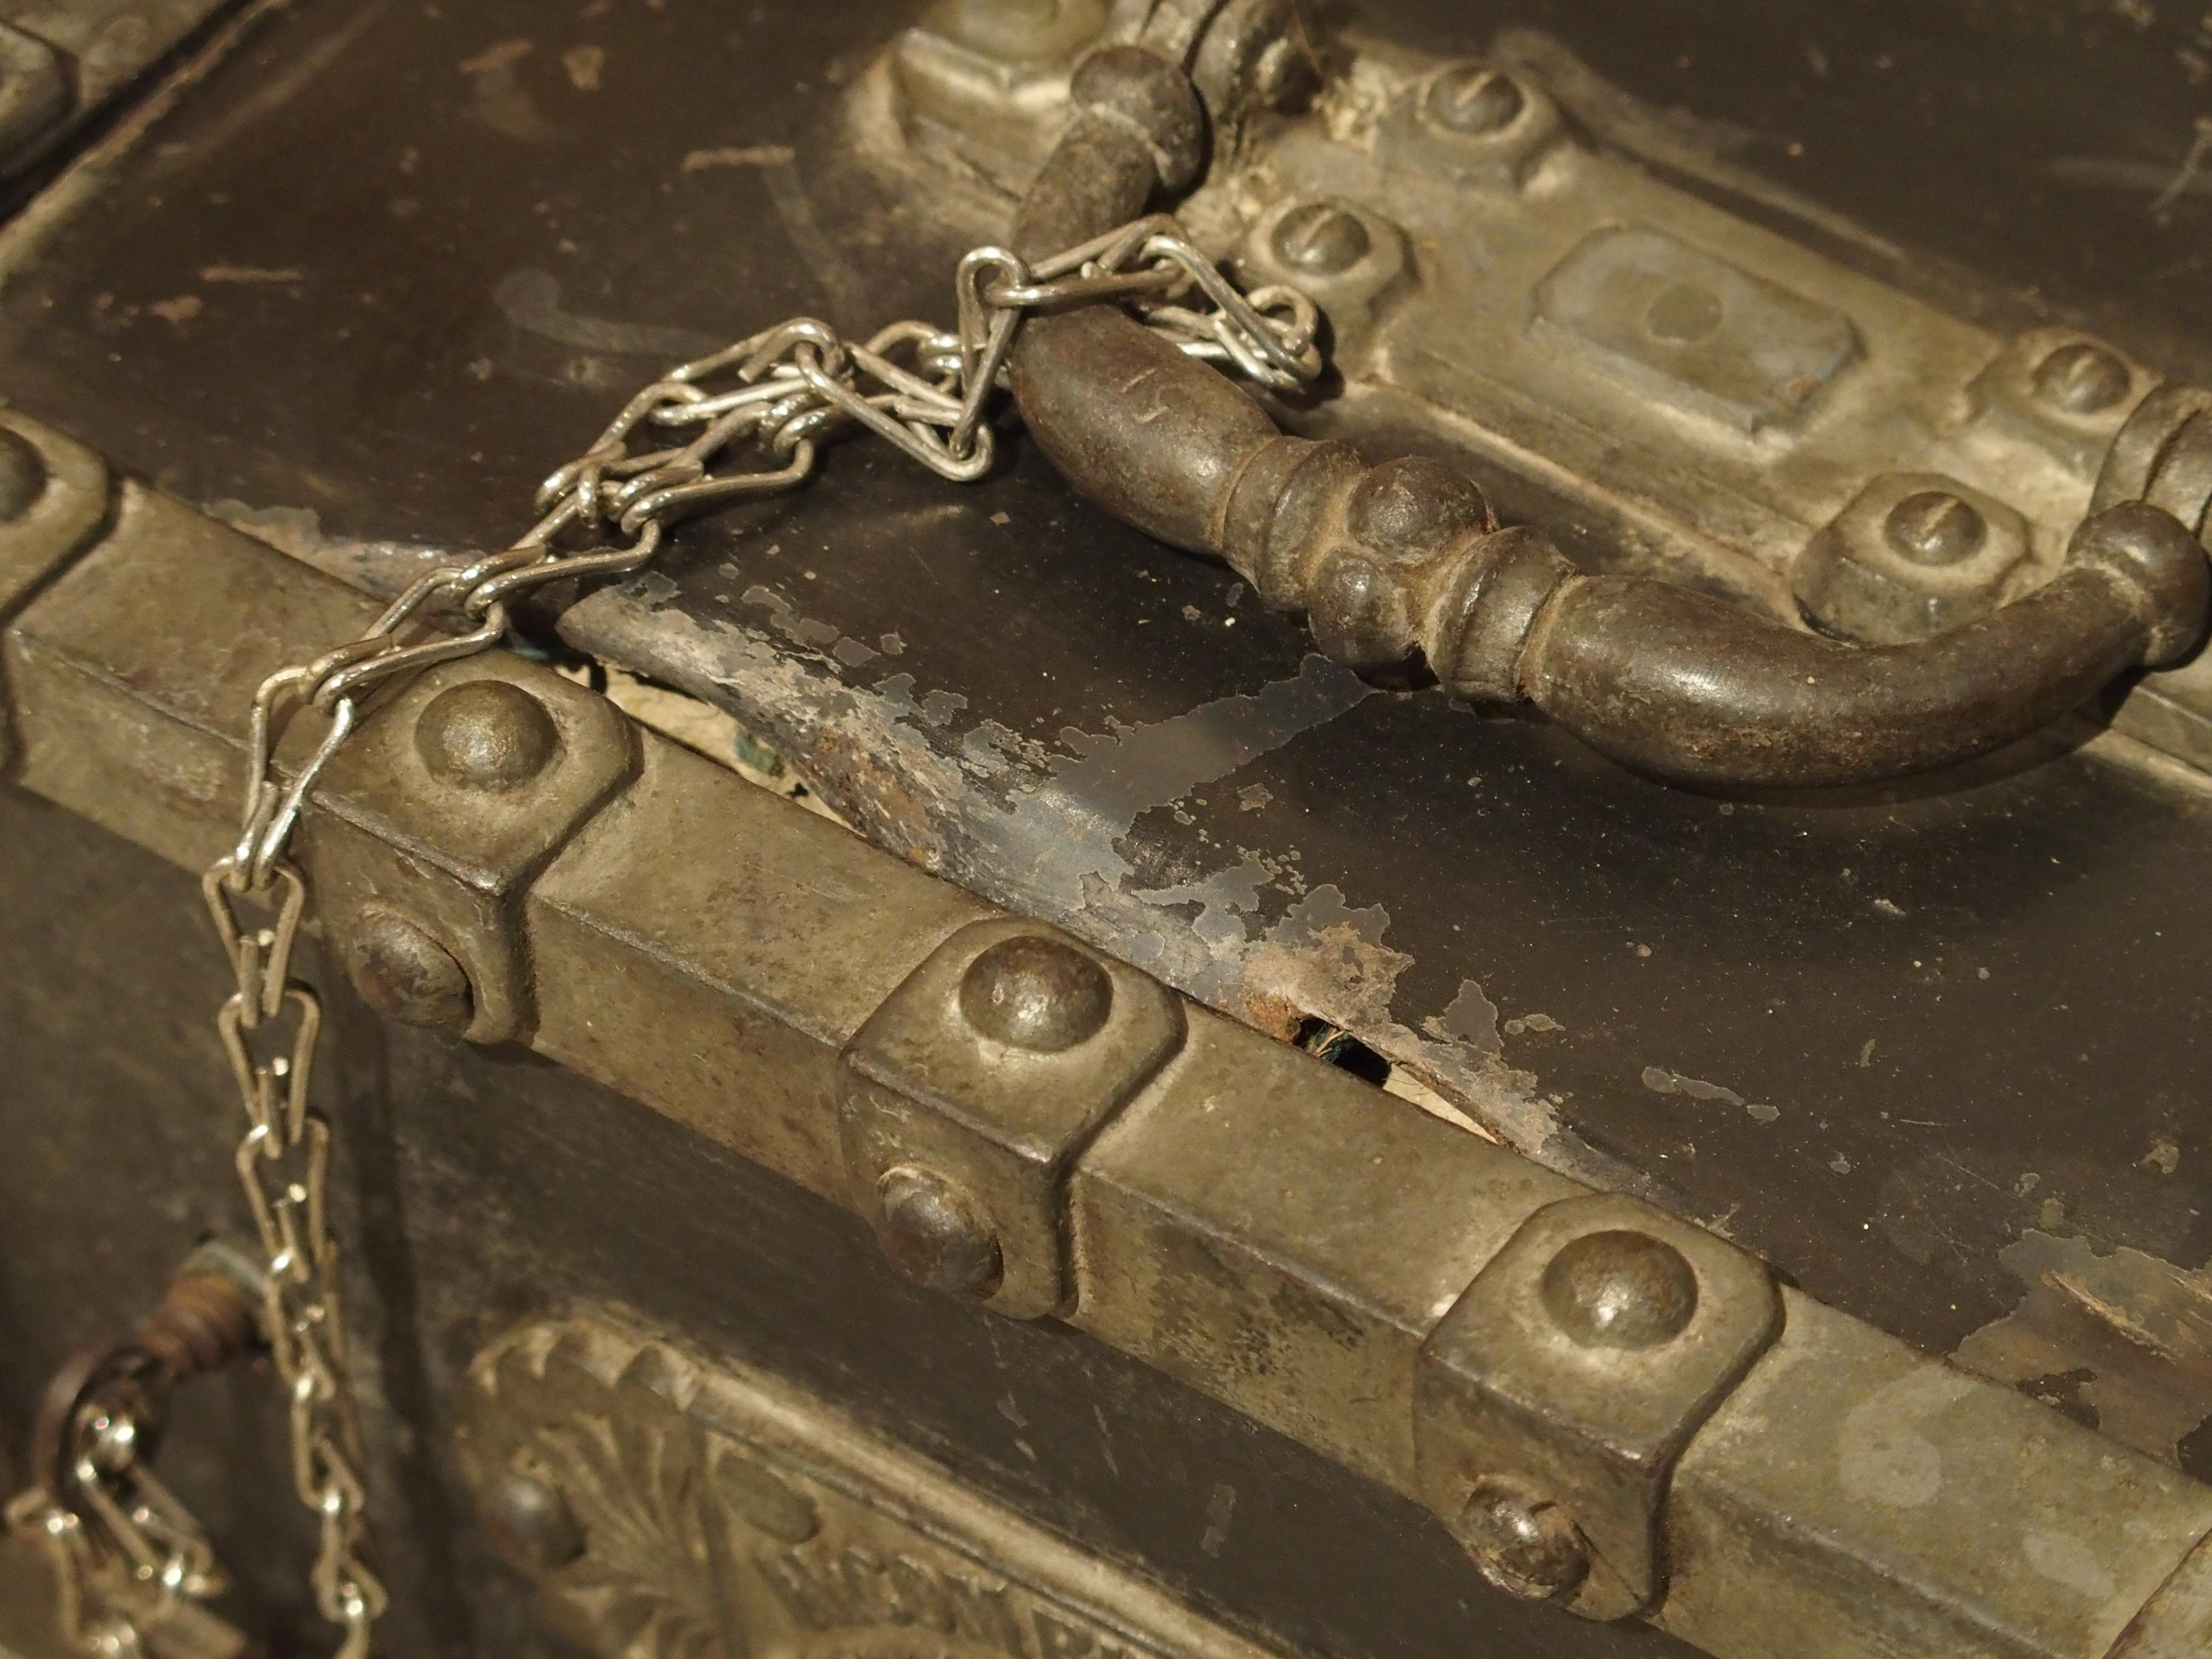 Polished Antique Bauche Cast Iron Safe from Northeastern France, circa 1870